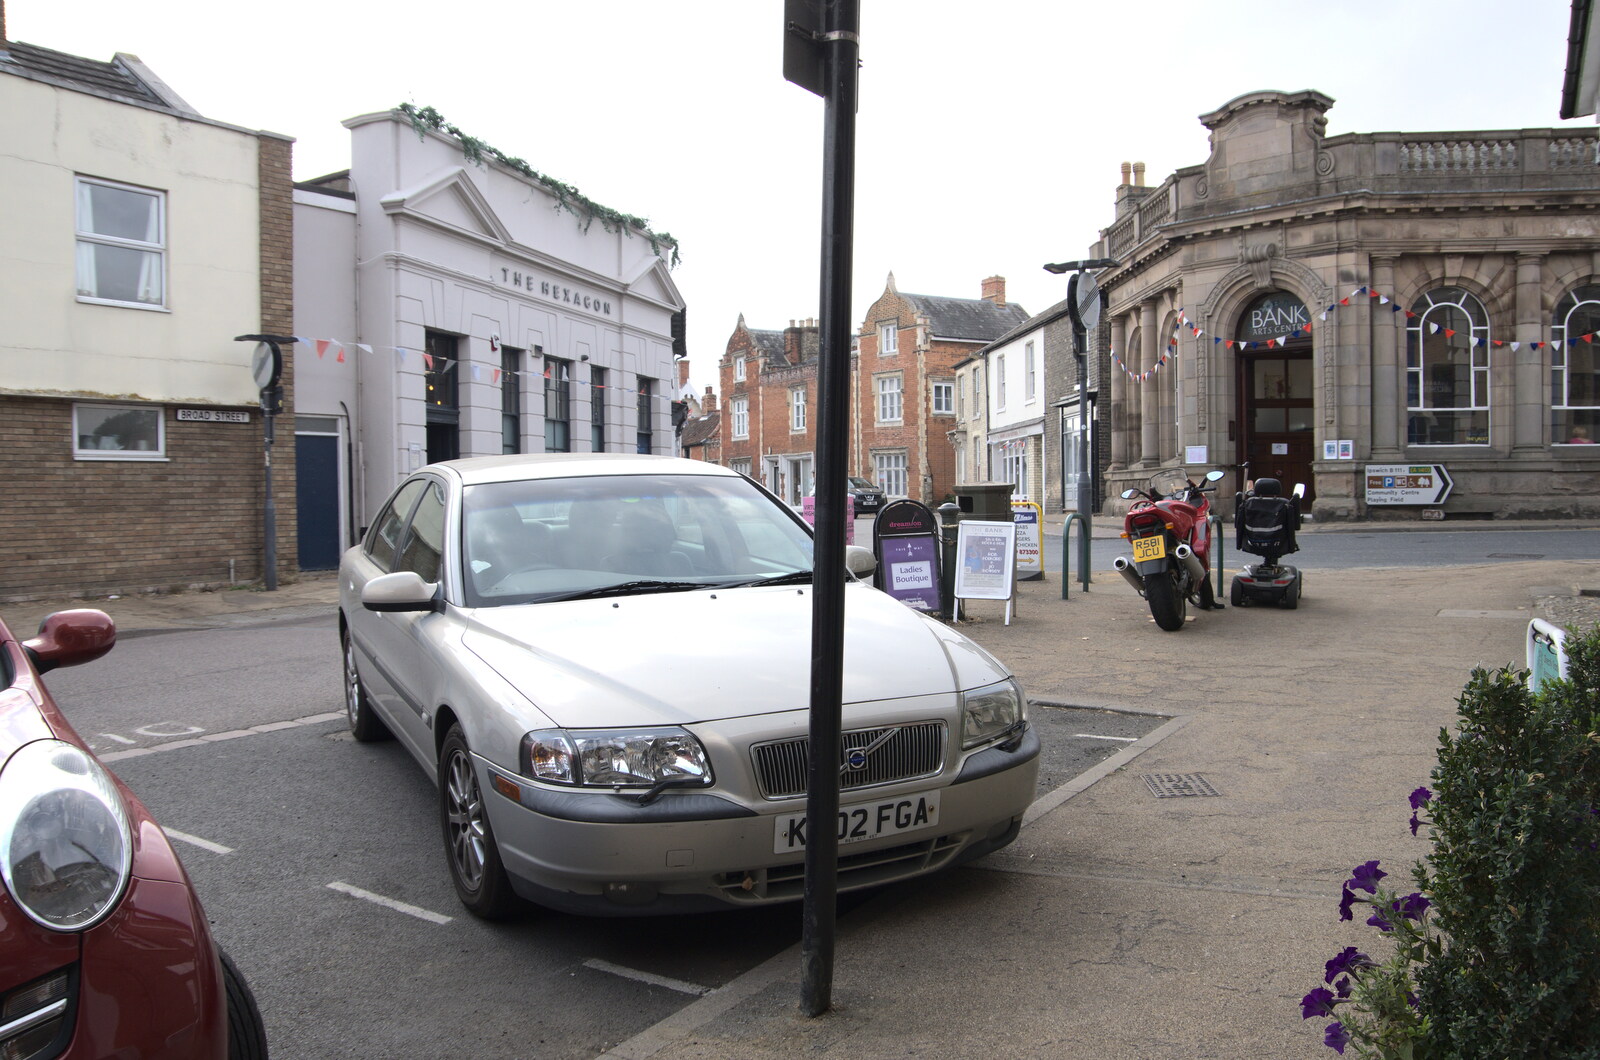 This driver's disability is clearly blindness from Art at The Bank, Eye, Suffolk - 17th August 2022